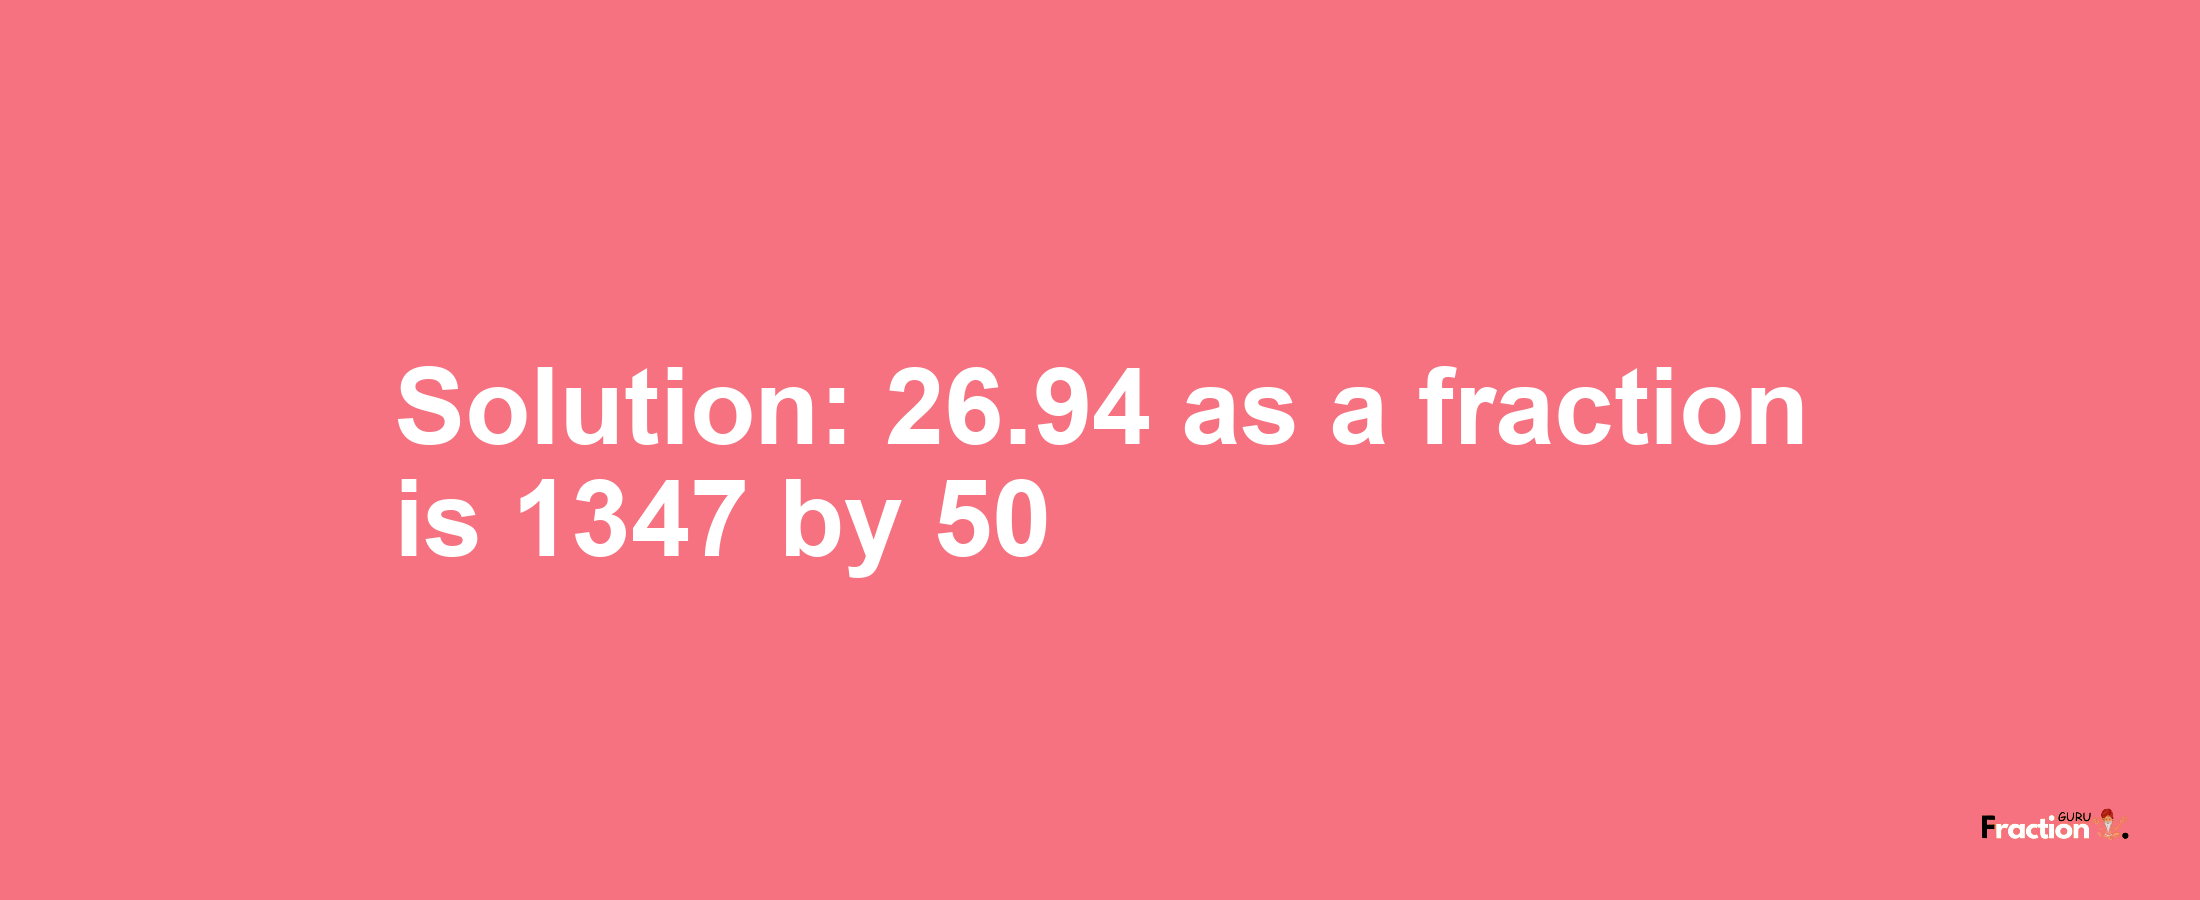 Solution:26.94 as a fraction is 1347/50